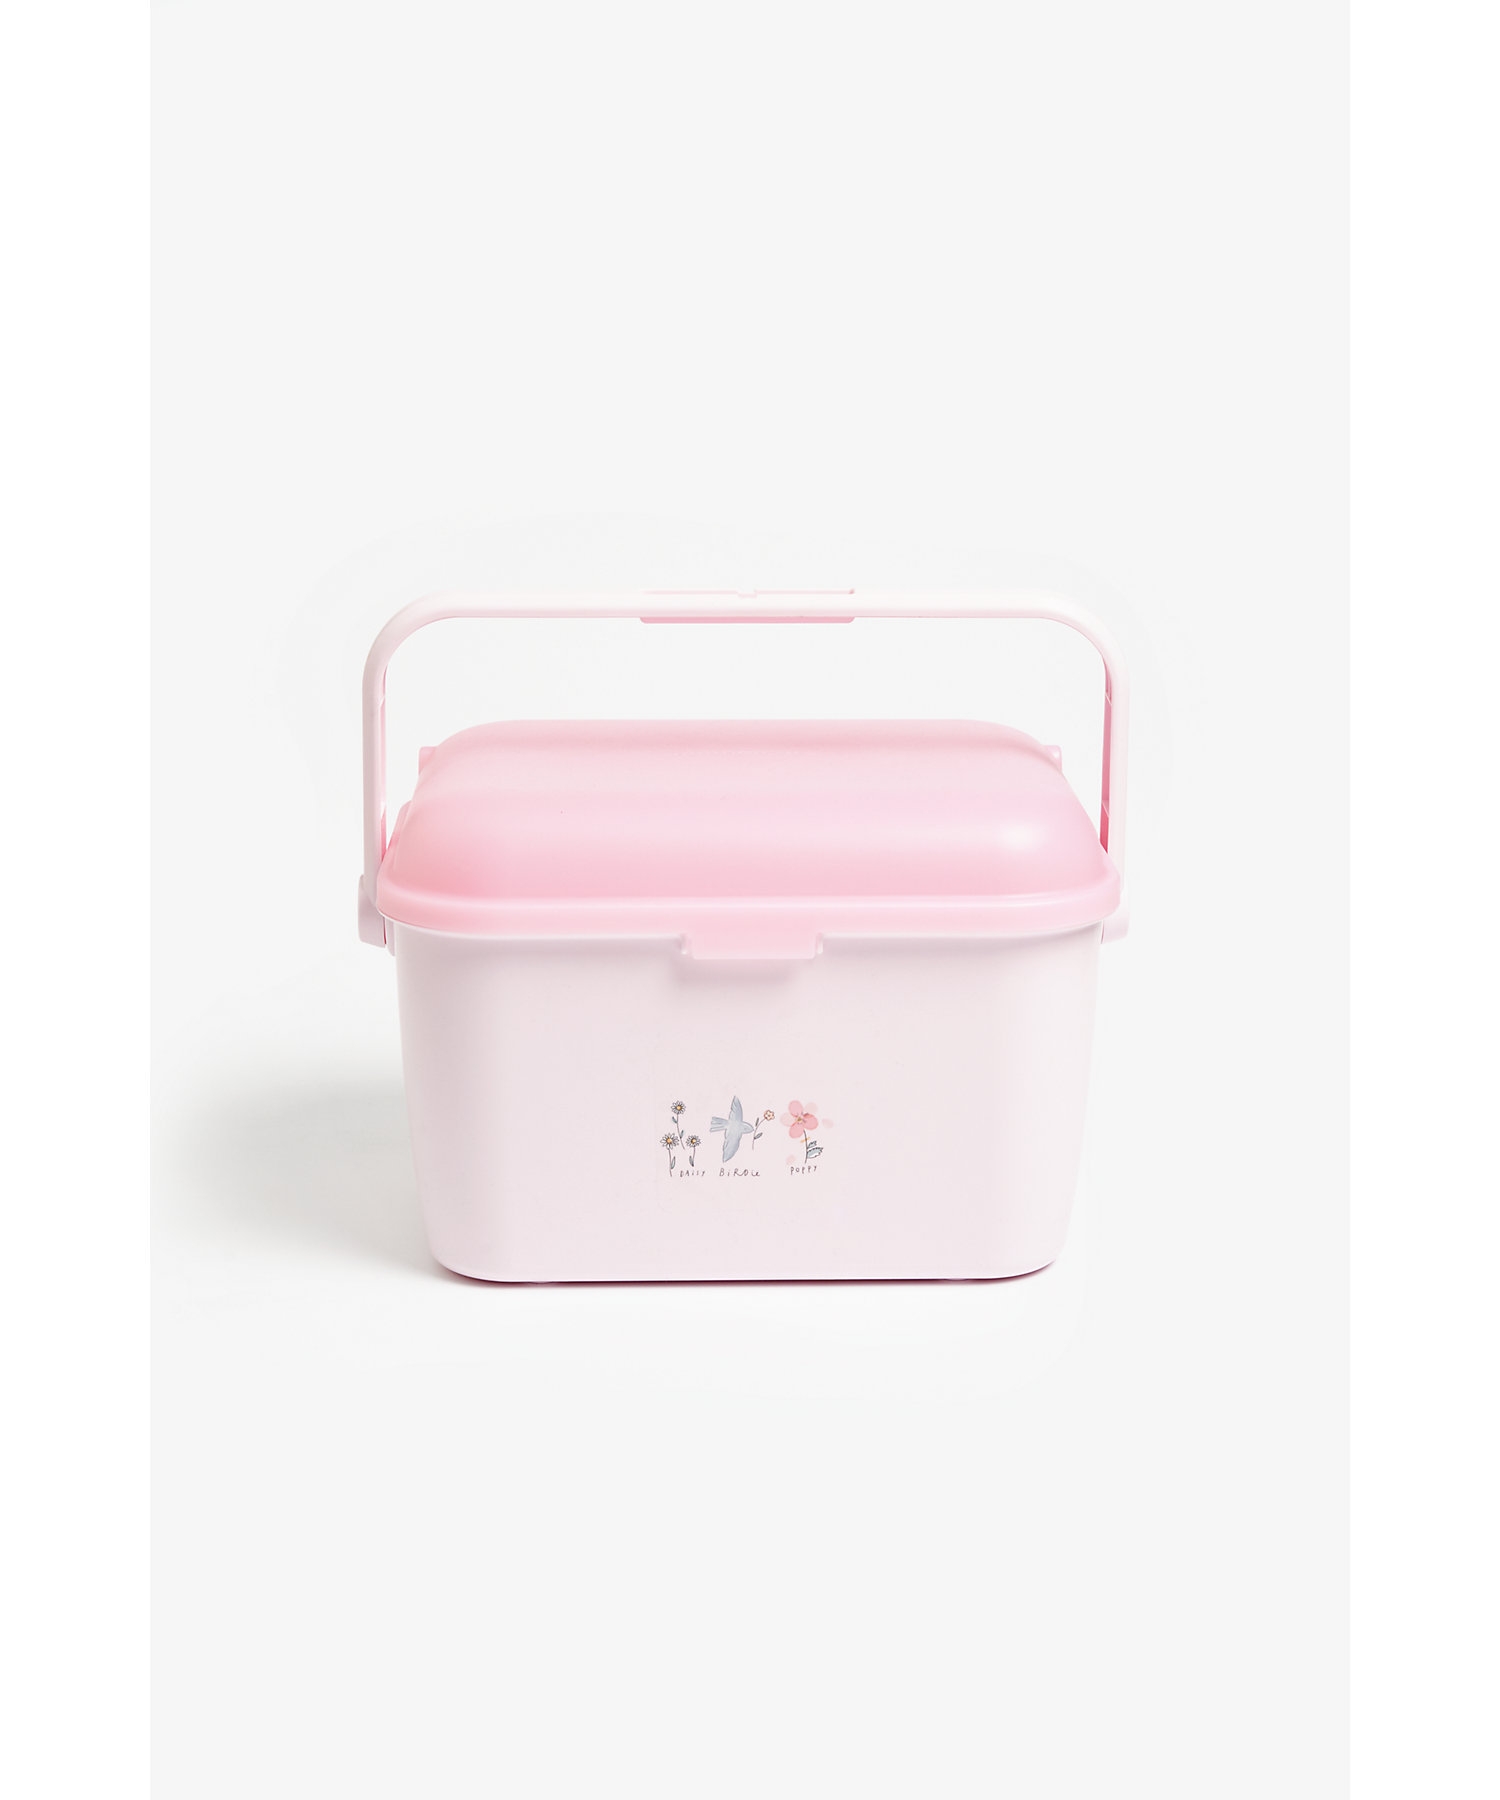 Mothercare Flutterby Bath Box Pink